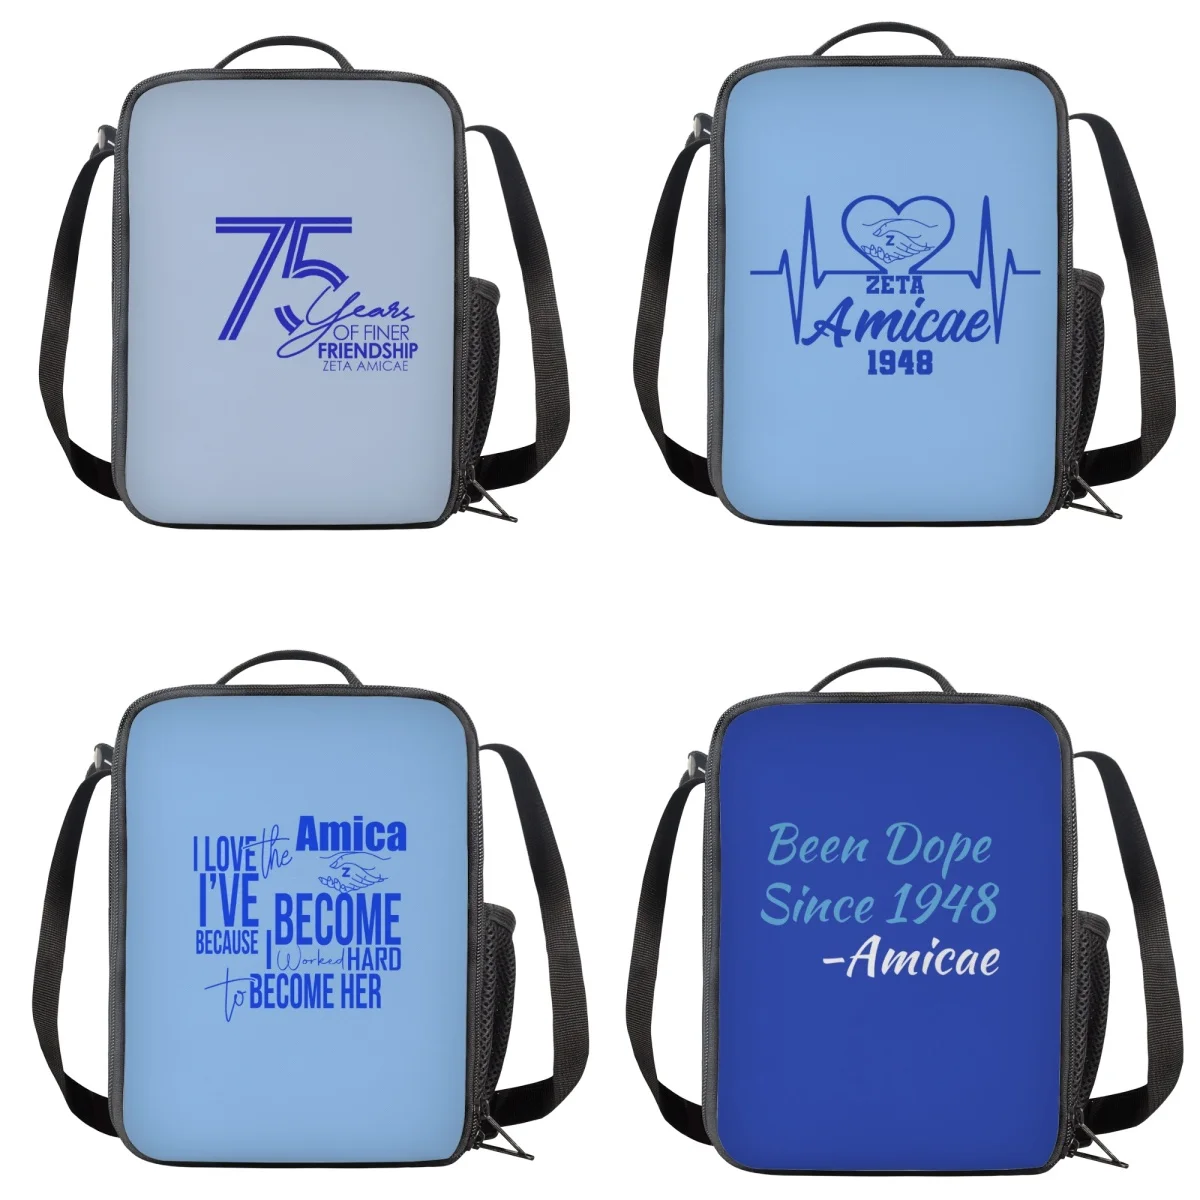 

Zeta Amicae Print Fashion Portable Lunchbox Back to School Kids Lunch Bag Insulated Thermal Picnic Pouch for Boys Girls Camping